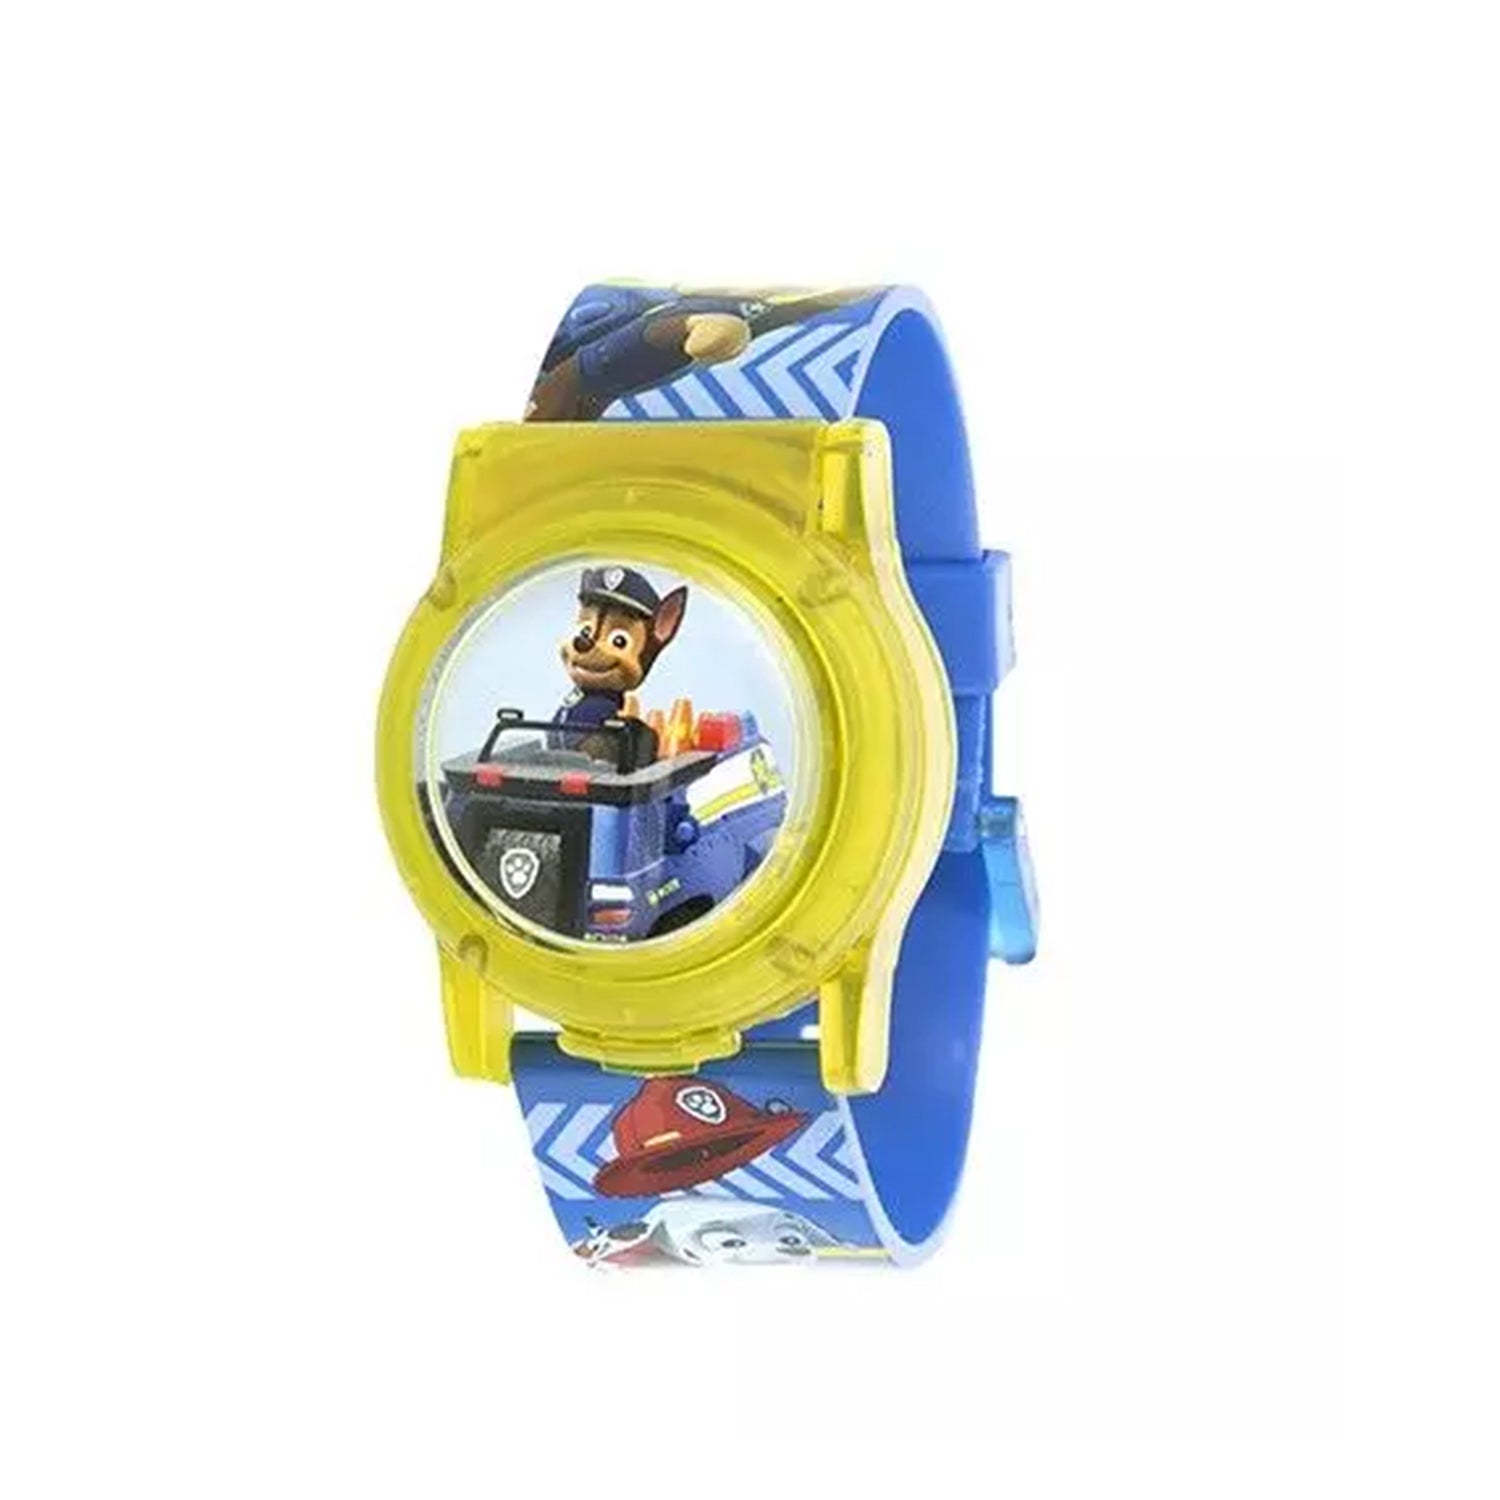 Flip Top Paw Patrol Watch in Colorful Gift Case, Date & Time, Yellow Face, Ages 3 - 5 - Close View